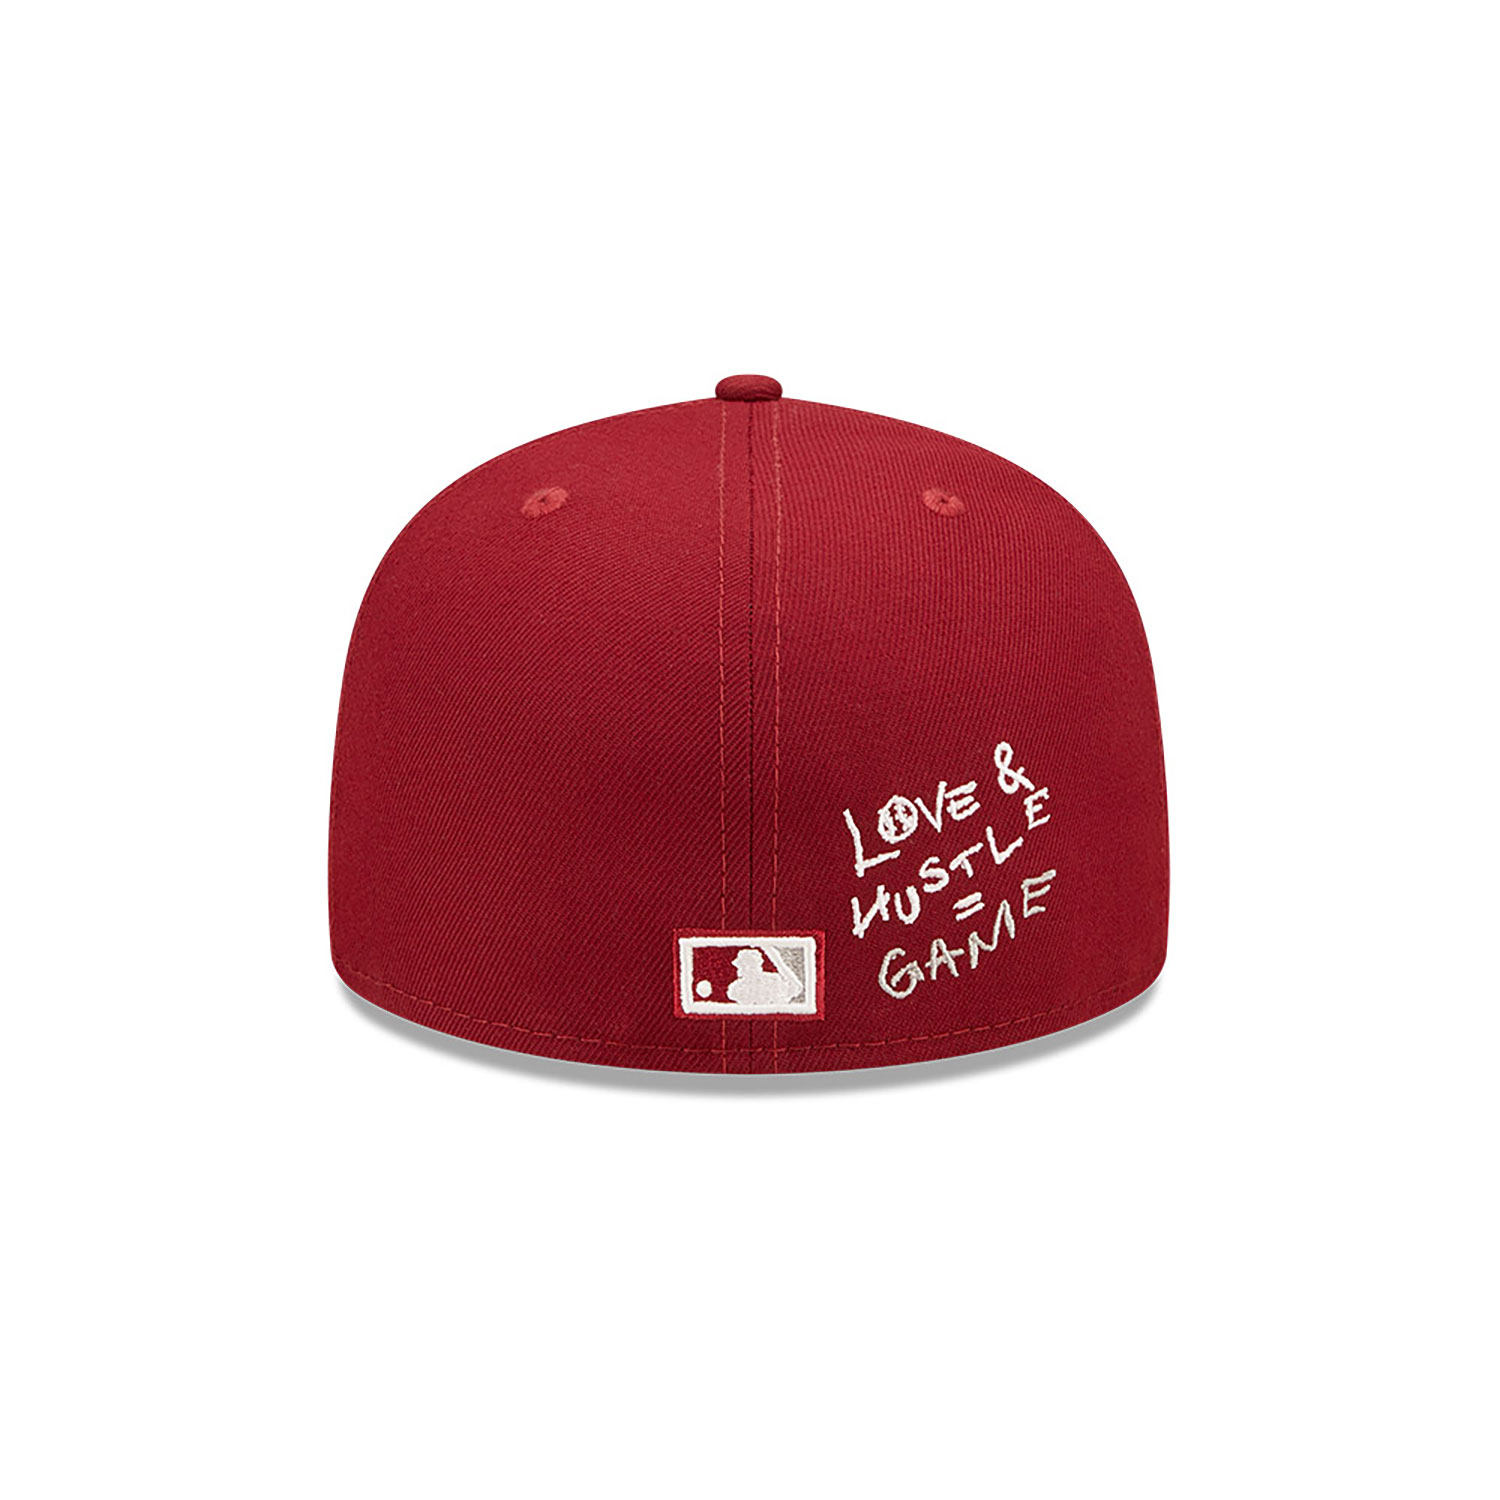 Philadelphia Phillies MLB Team Heart Red 59FIFTY Fitted Cap